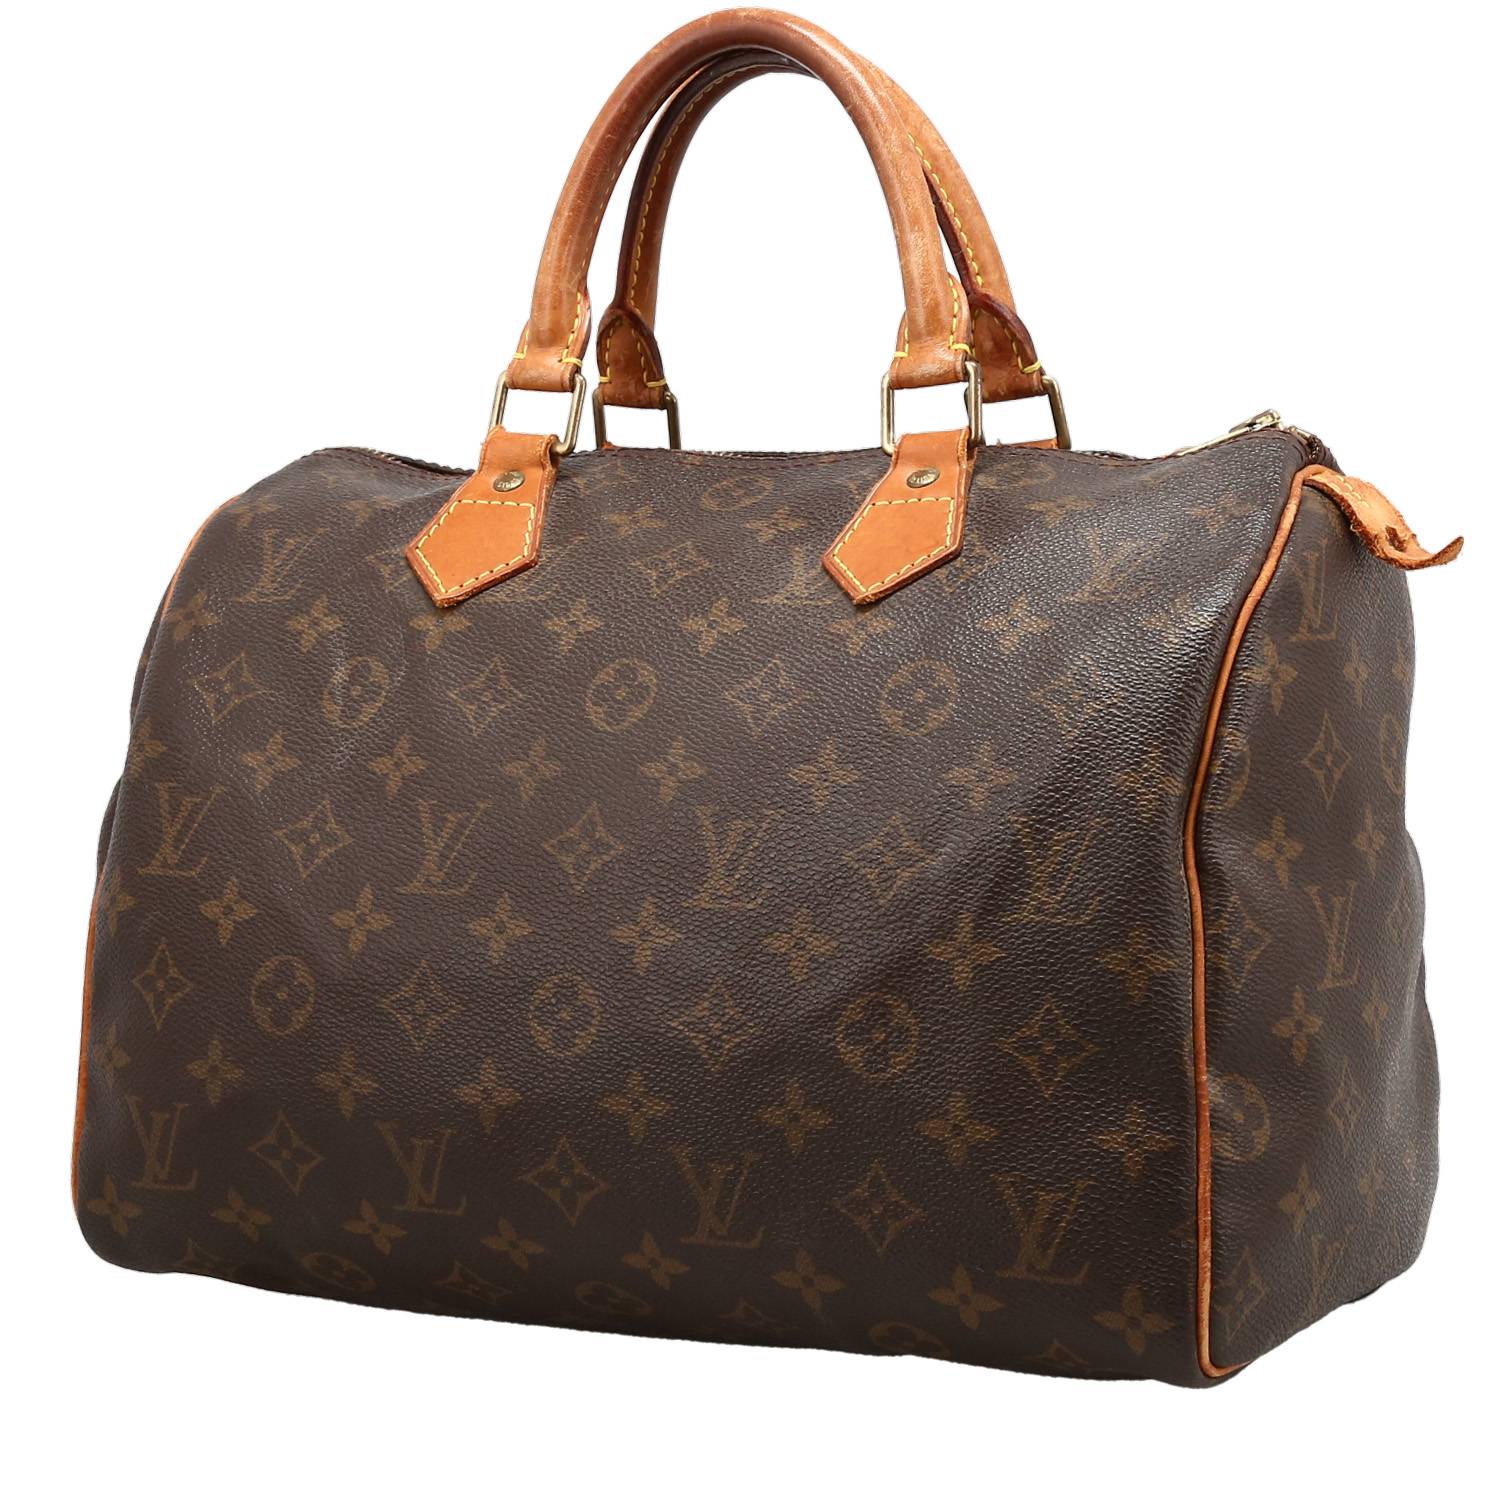 Louis Vuitton Speedy 30 handbag in brown monogram canvas and natural leather - 00pp